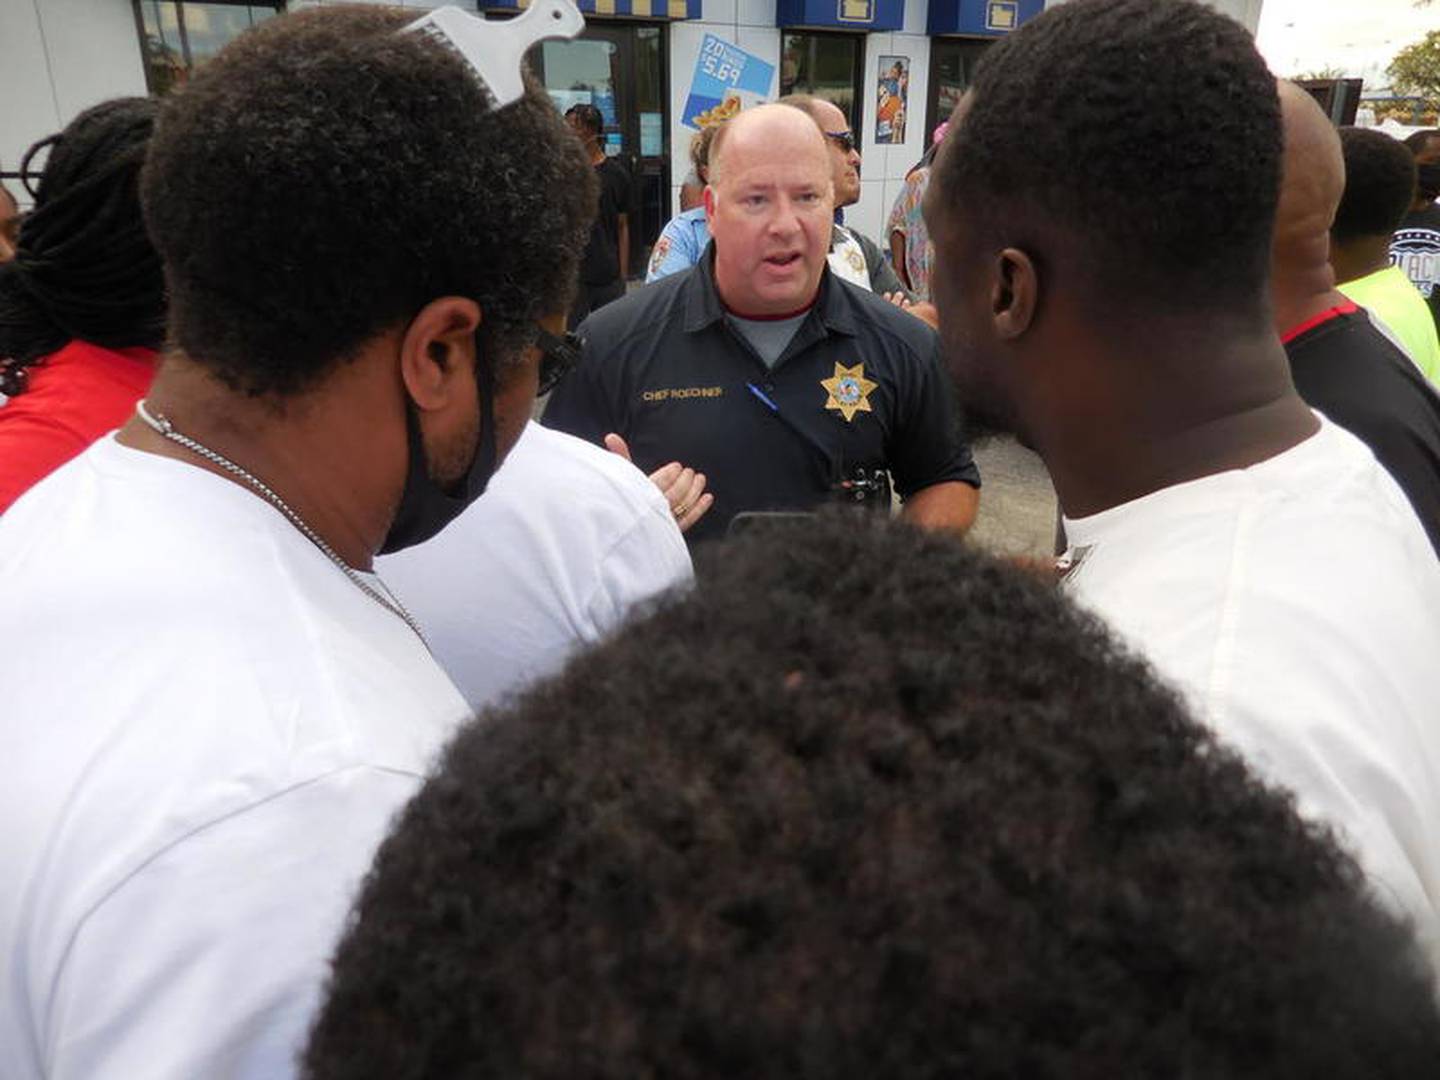 Joliet Police Chief Al Roechner engaged with demonstrators at a rally Sunday to protest the death of Eric Lurry.